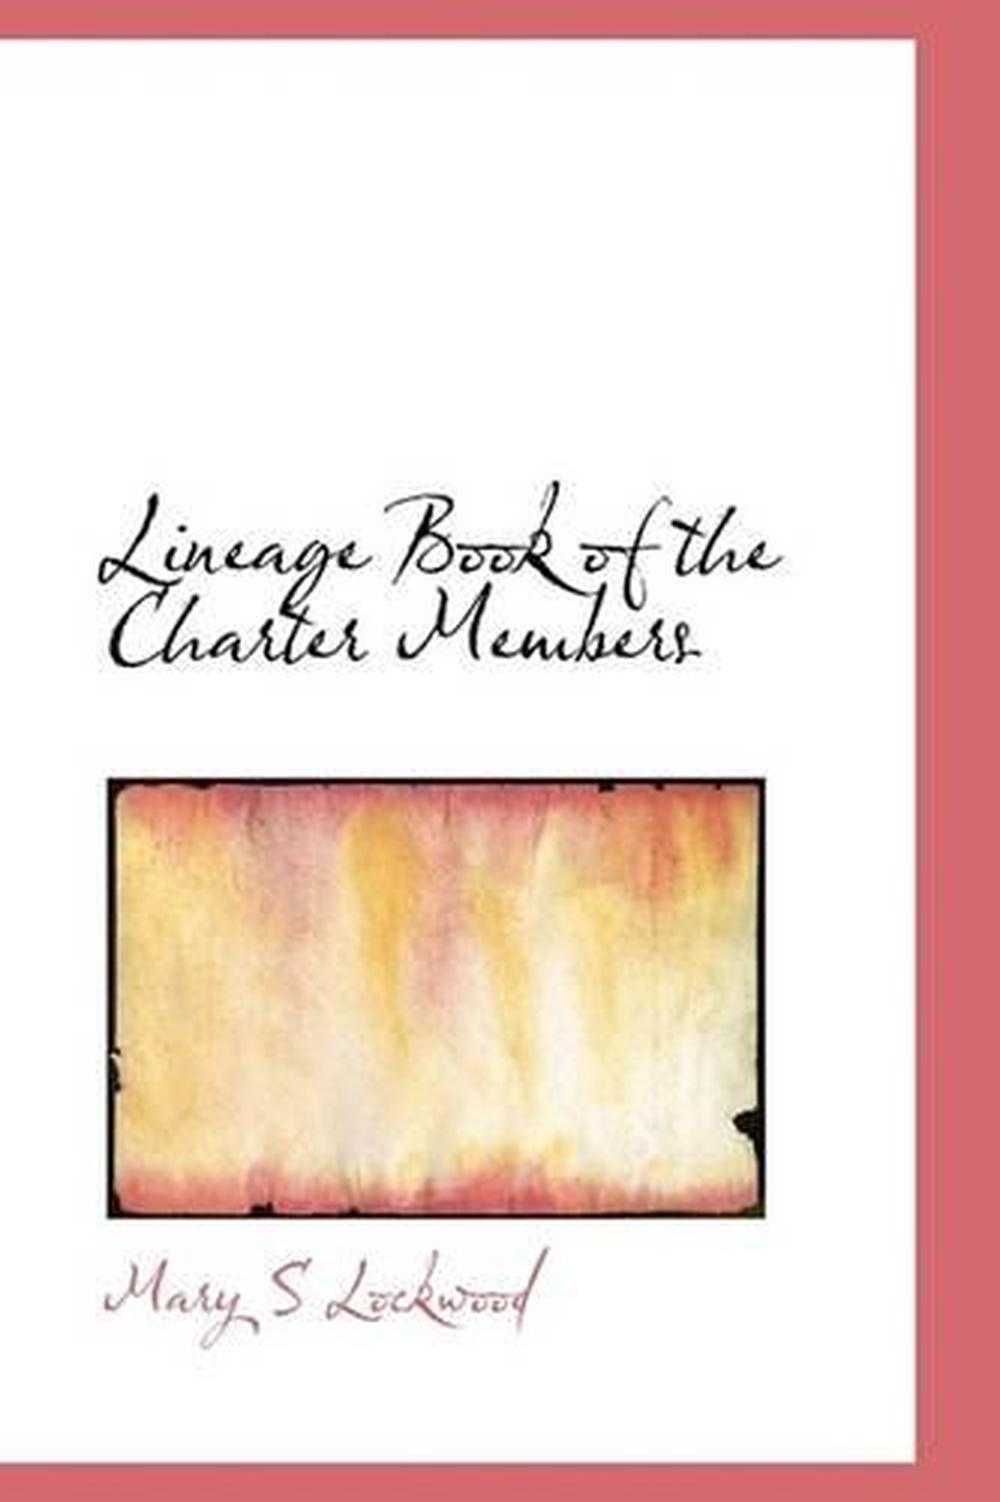 Lineage Book of the Charter Members by Mary S Lockwood (English